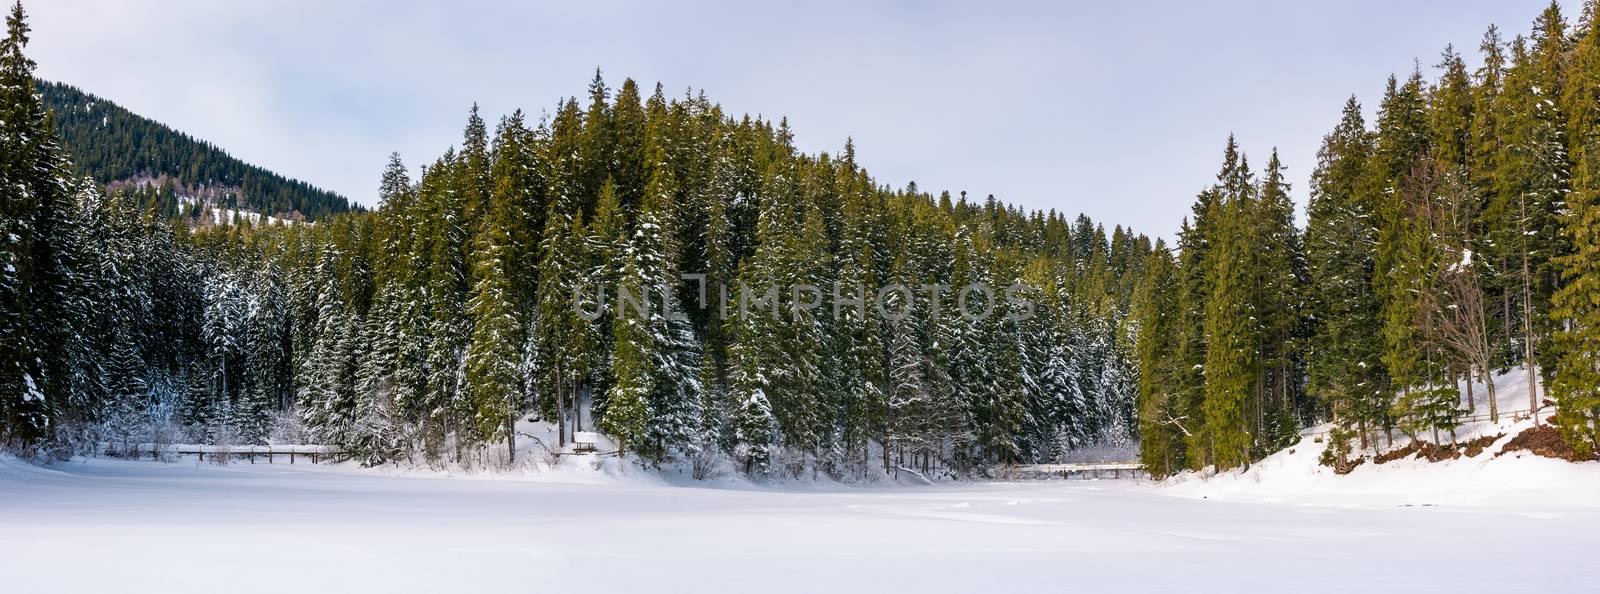 panorama of coniferous forest in winter by Pellinni